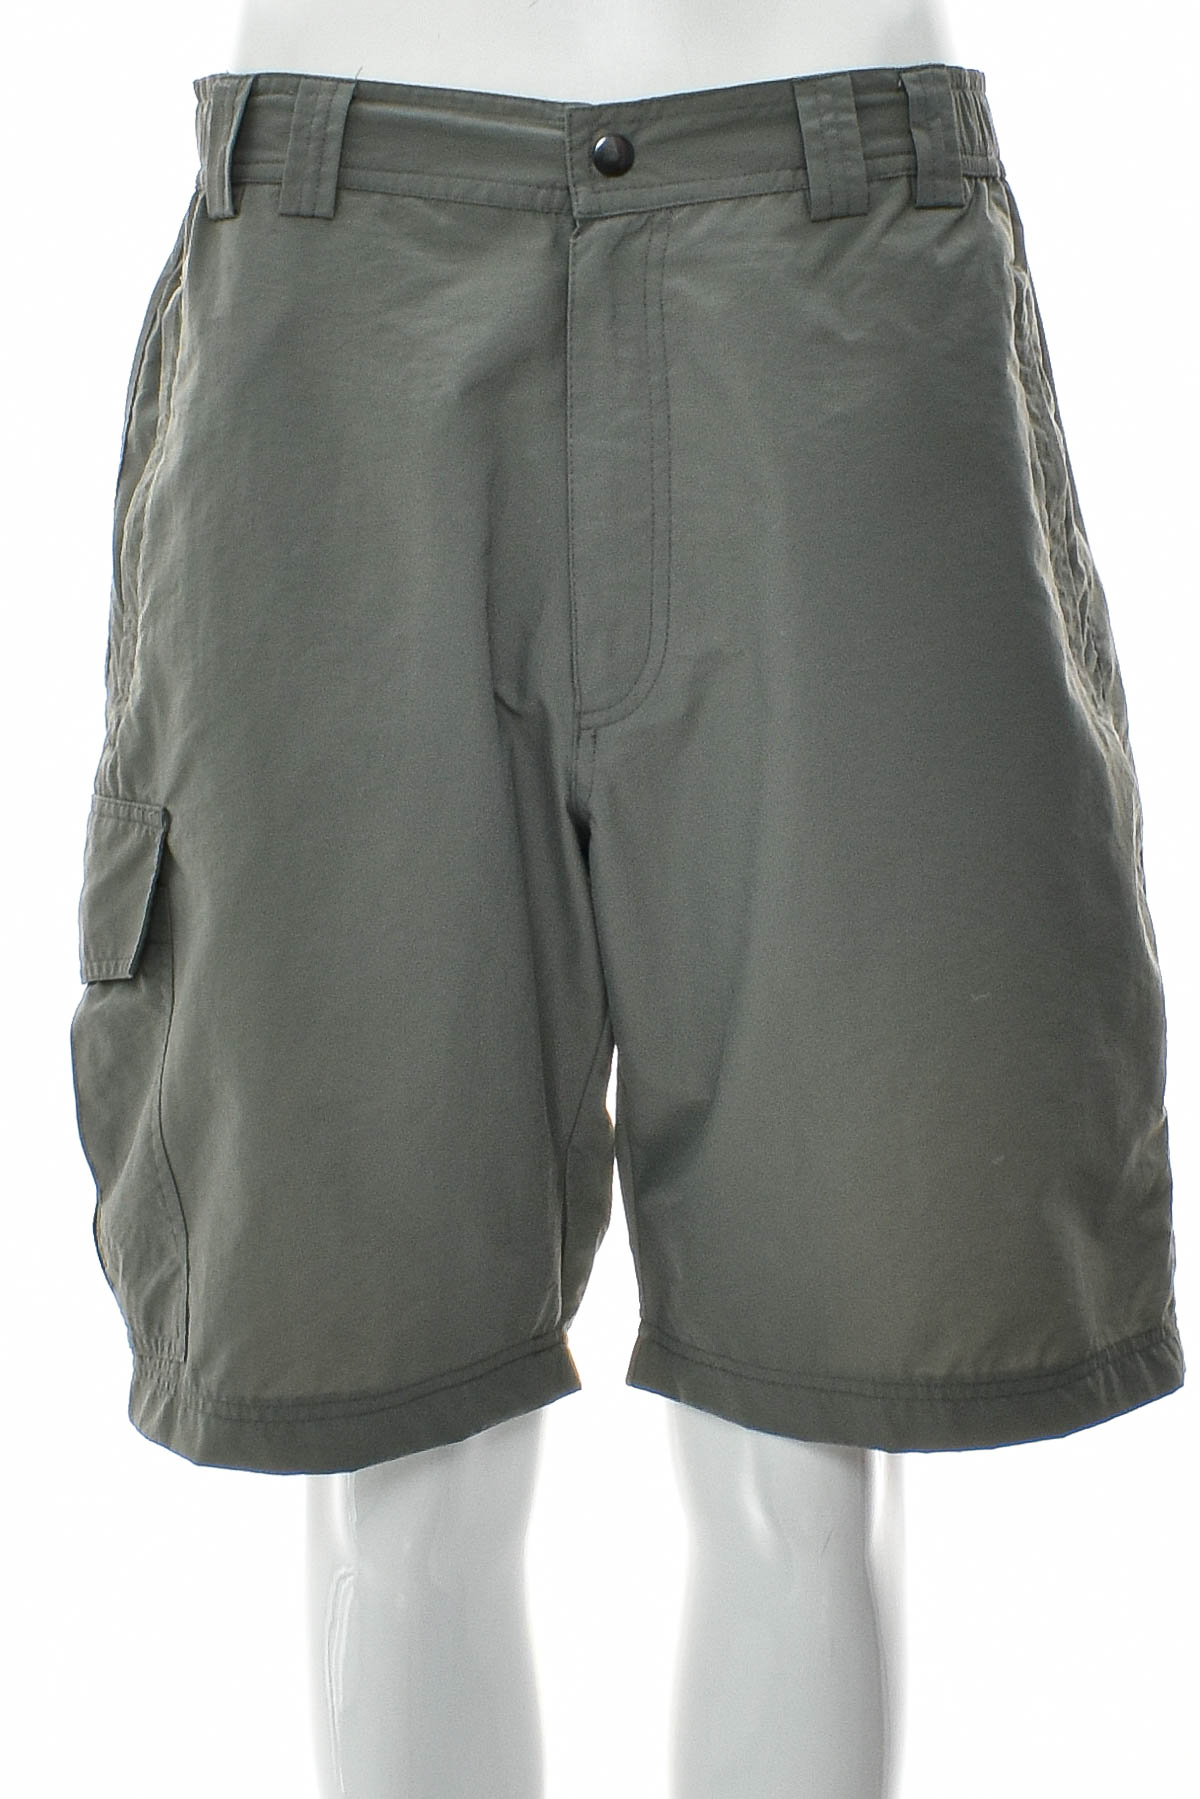 Men's shorts - OUTDOOR TIME - 0